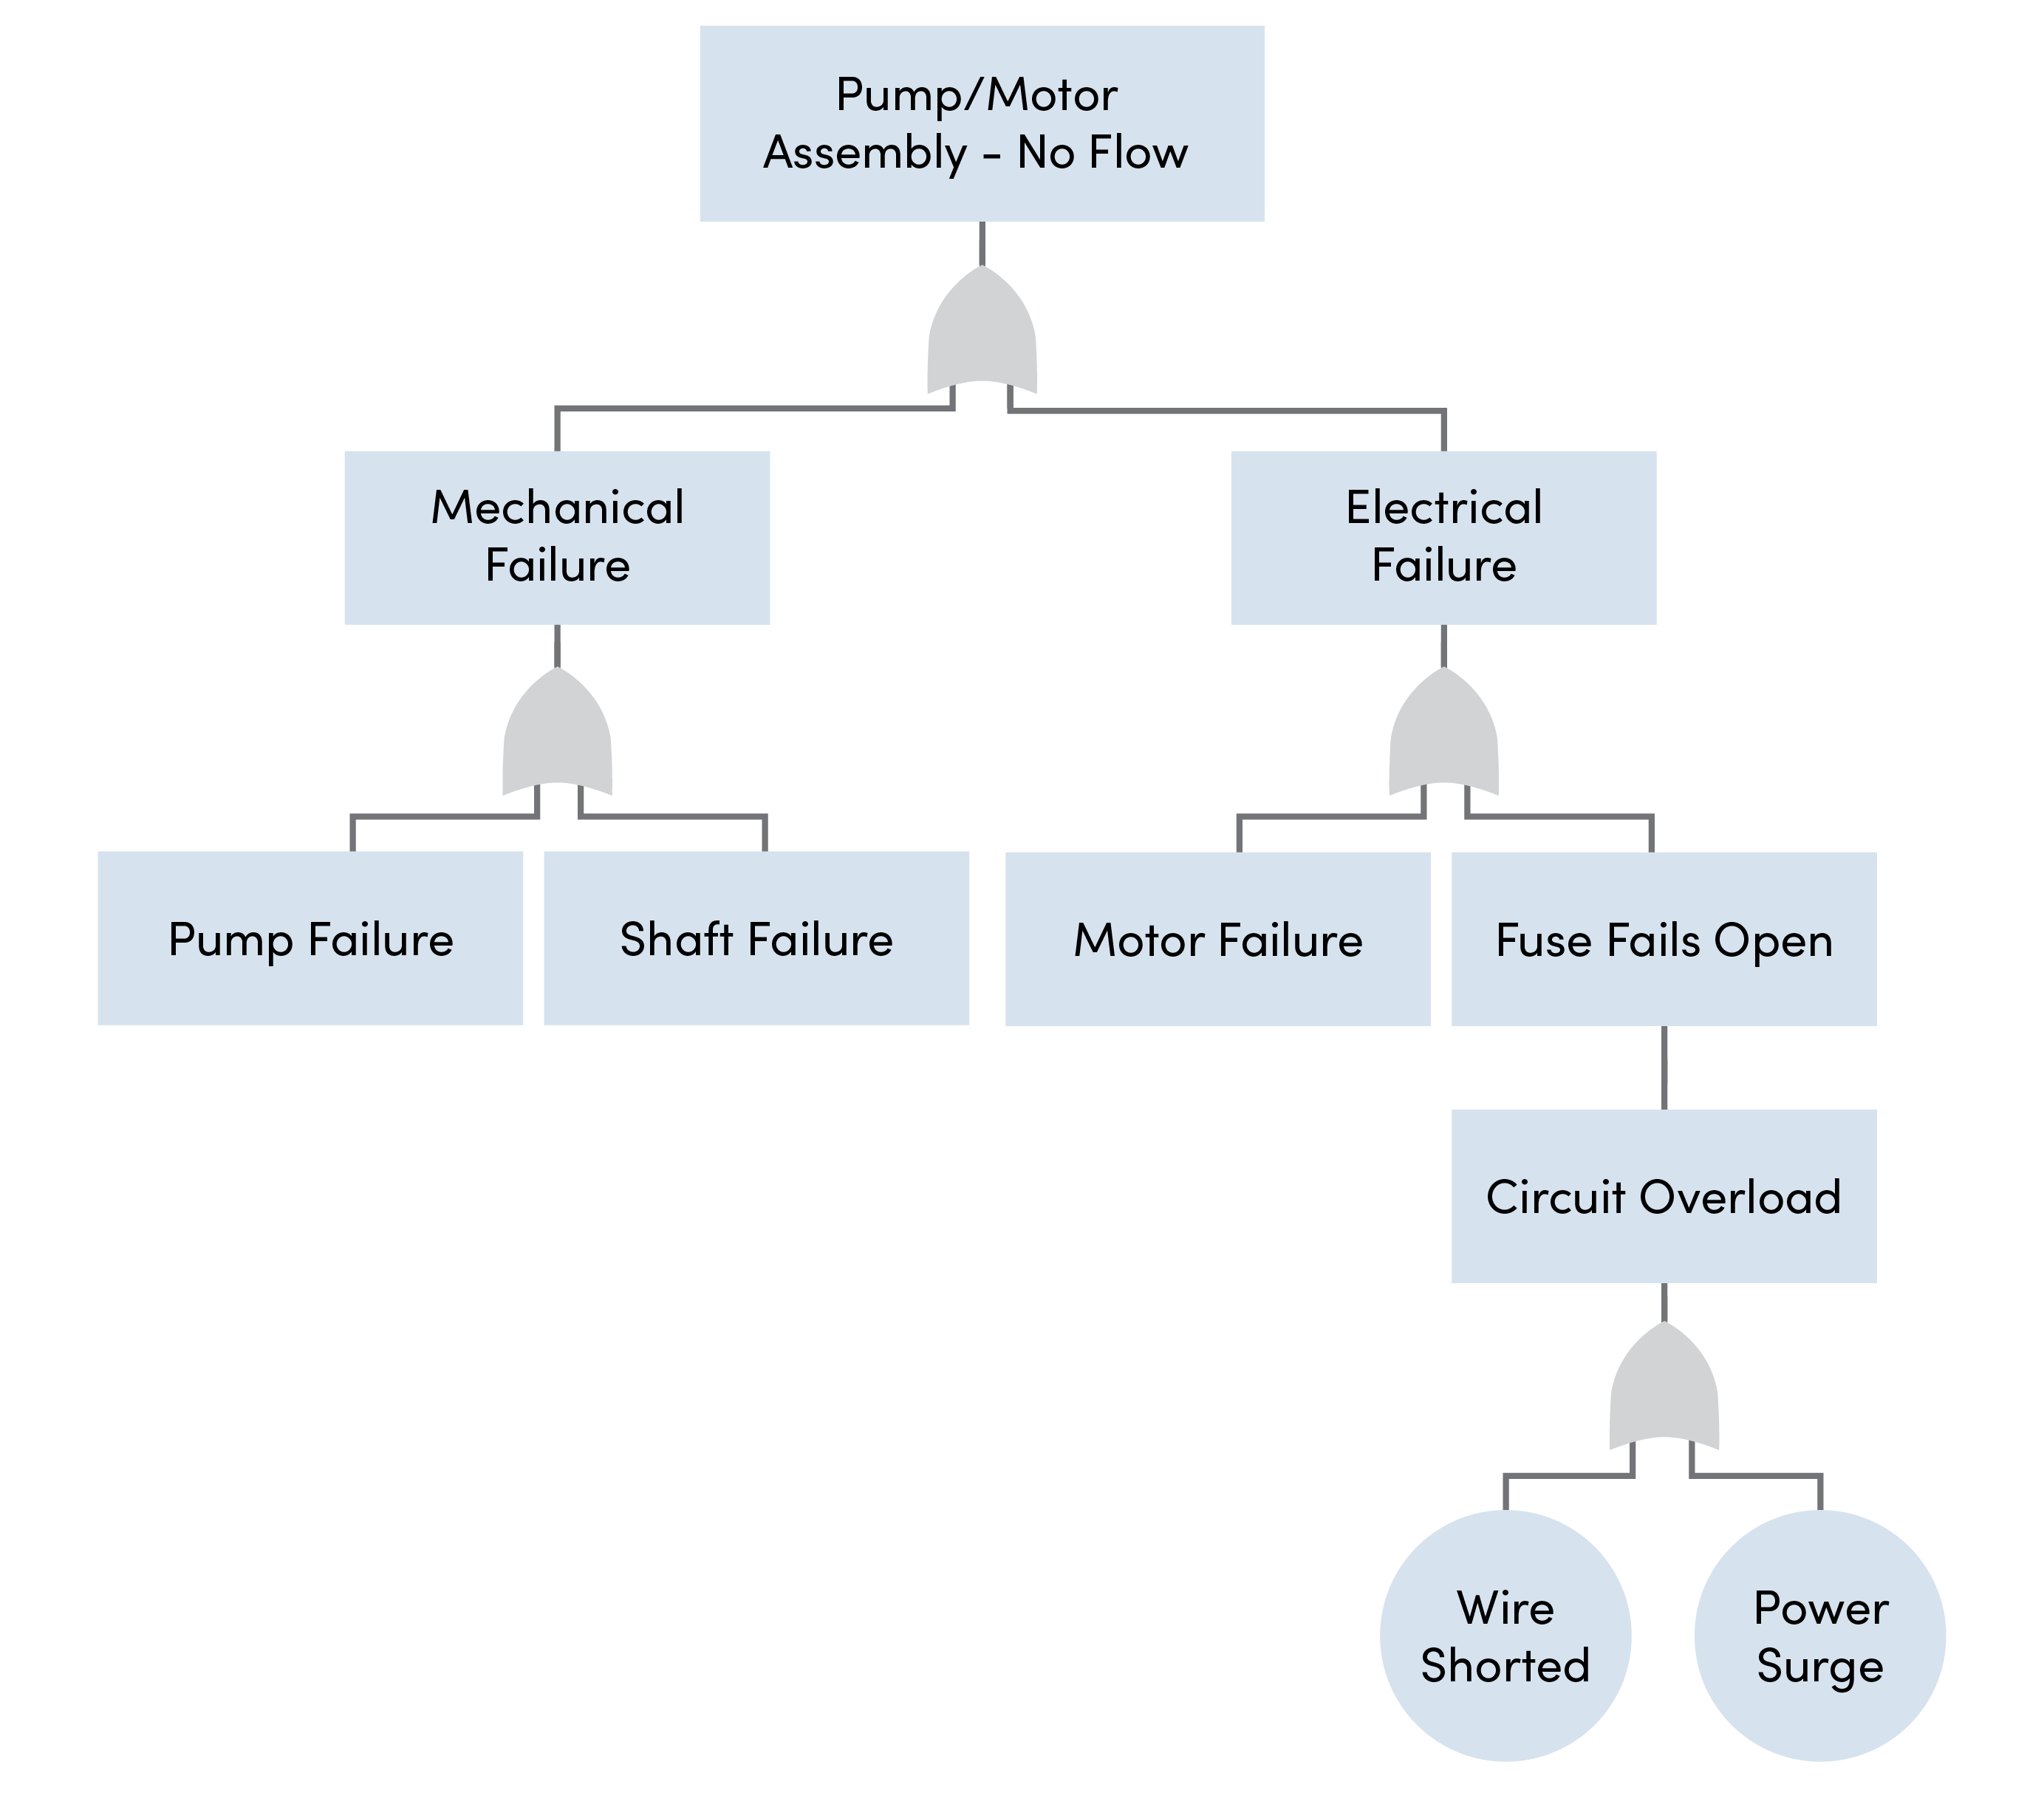 The image shows a fault tree diagram represetend with symbols and lines. The diagram shows the illustration of a pump or motor assembly not having any flow and the possible root causes.